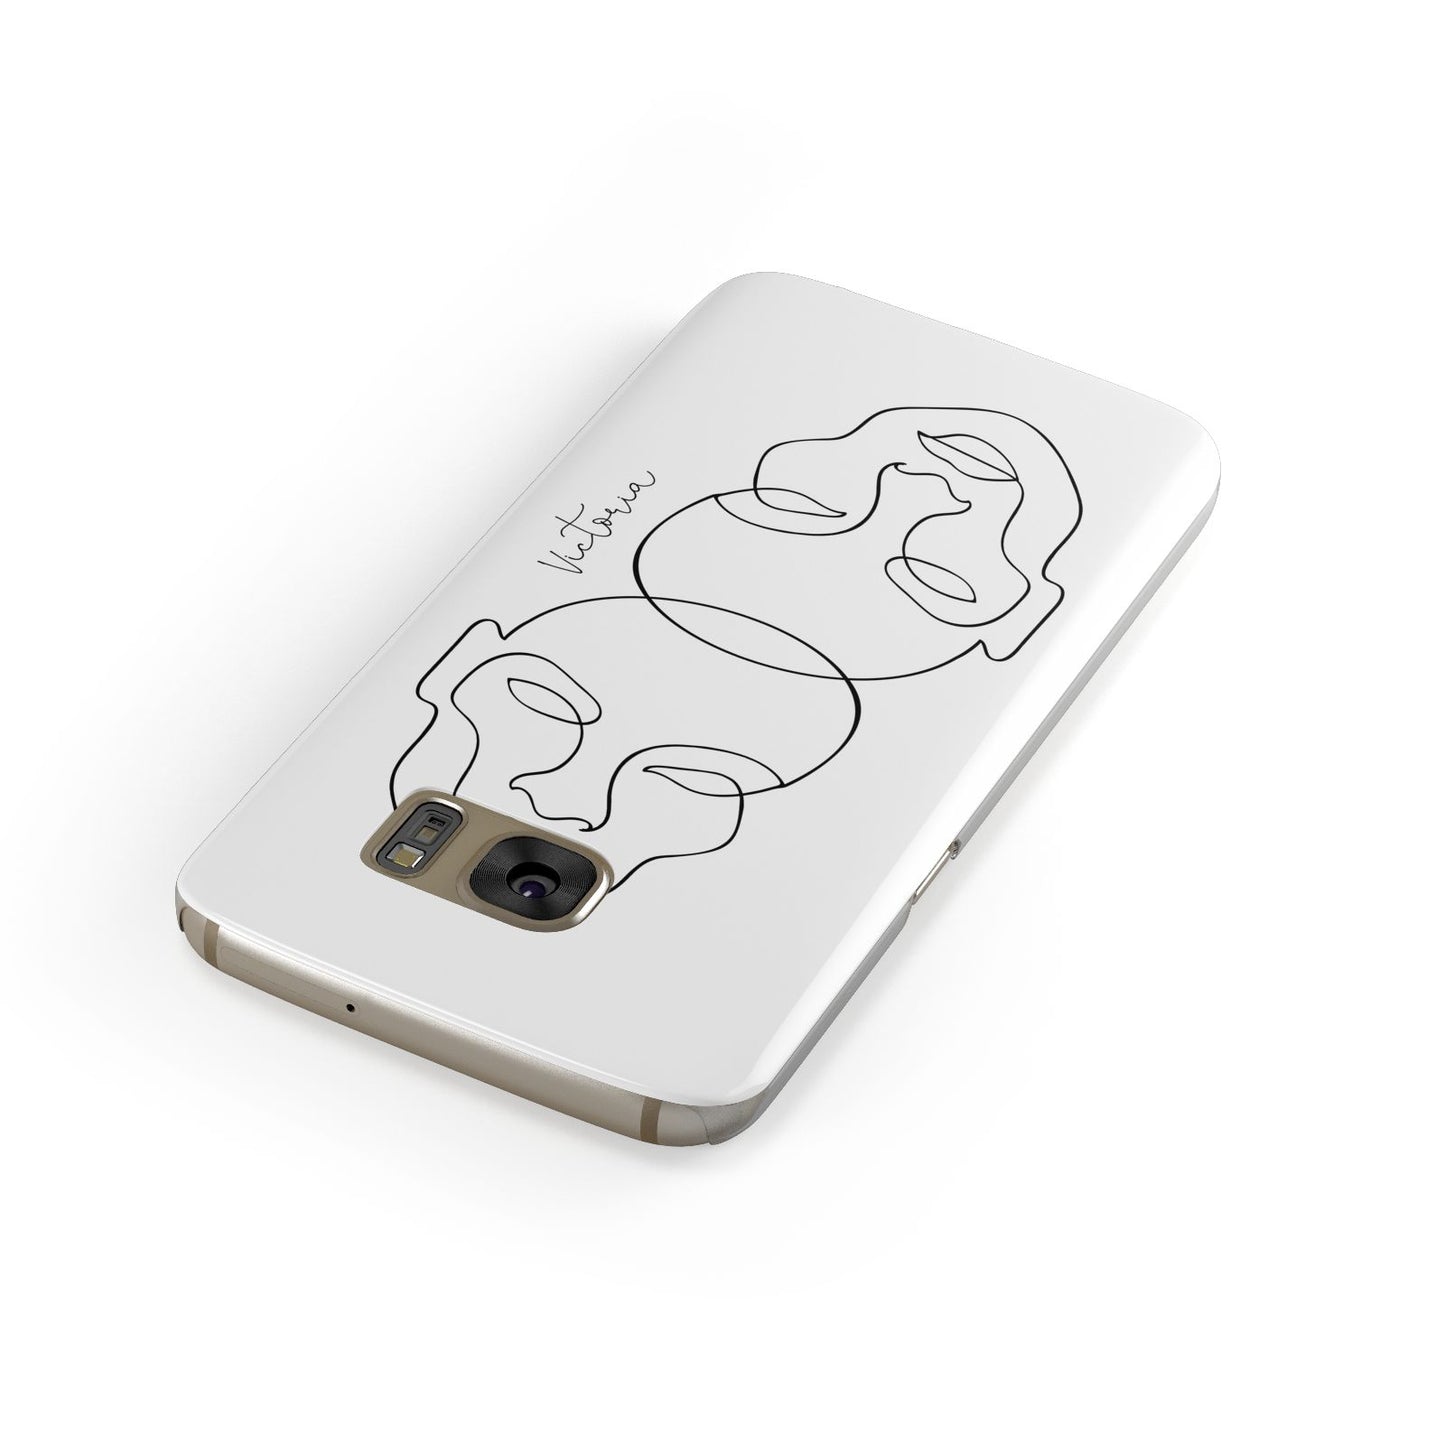 Personalised White Line Art Samsung Galaxy Case Front Close Up